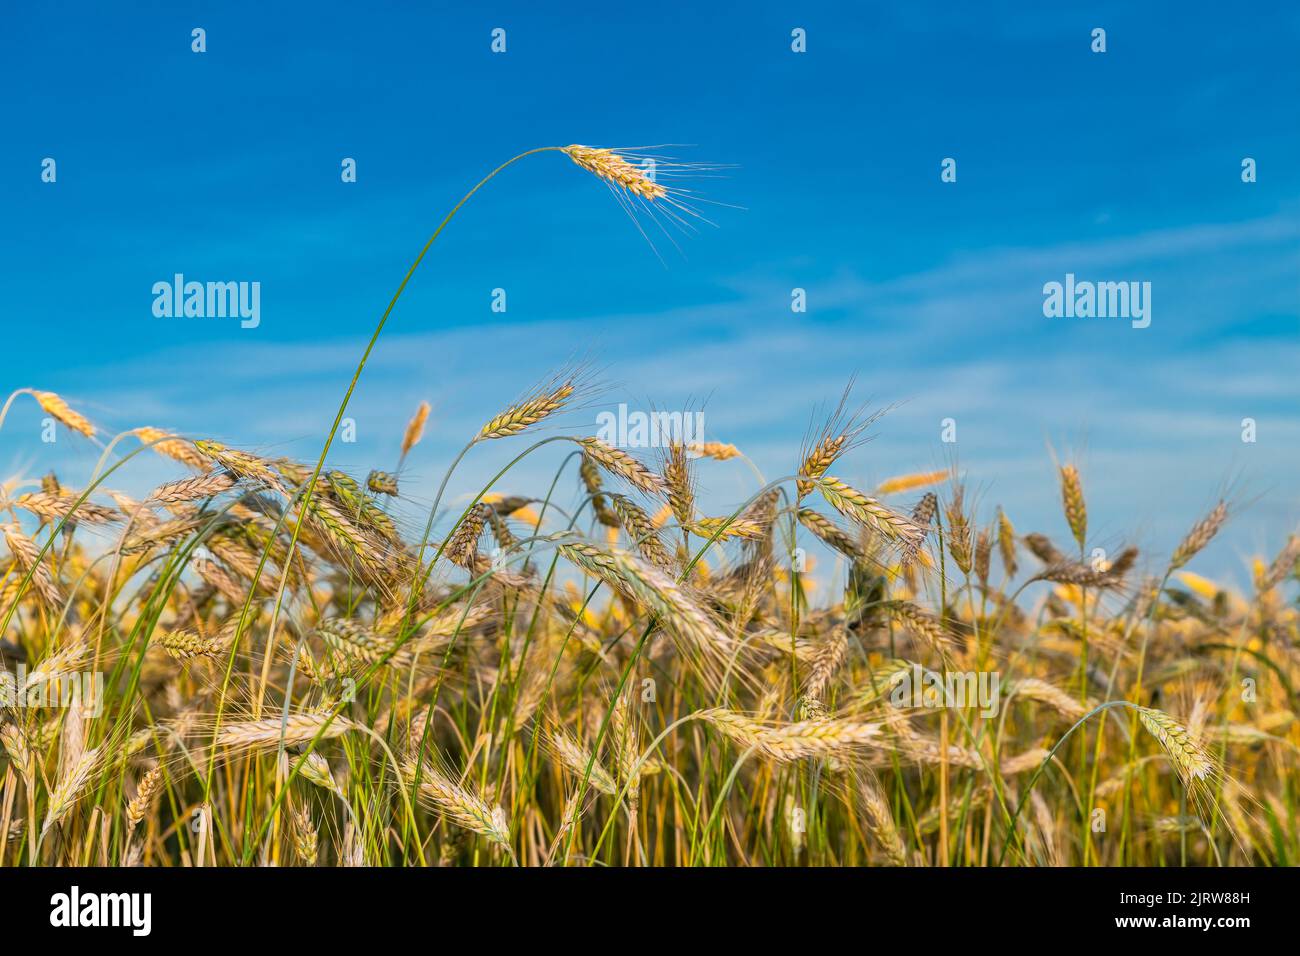 Closeup of ripening rye field with one protruding corn ear on blue sky background. Secale cereale. Yellow grain spike on green stem in rural cornfield. Stock Photo